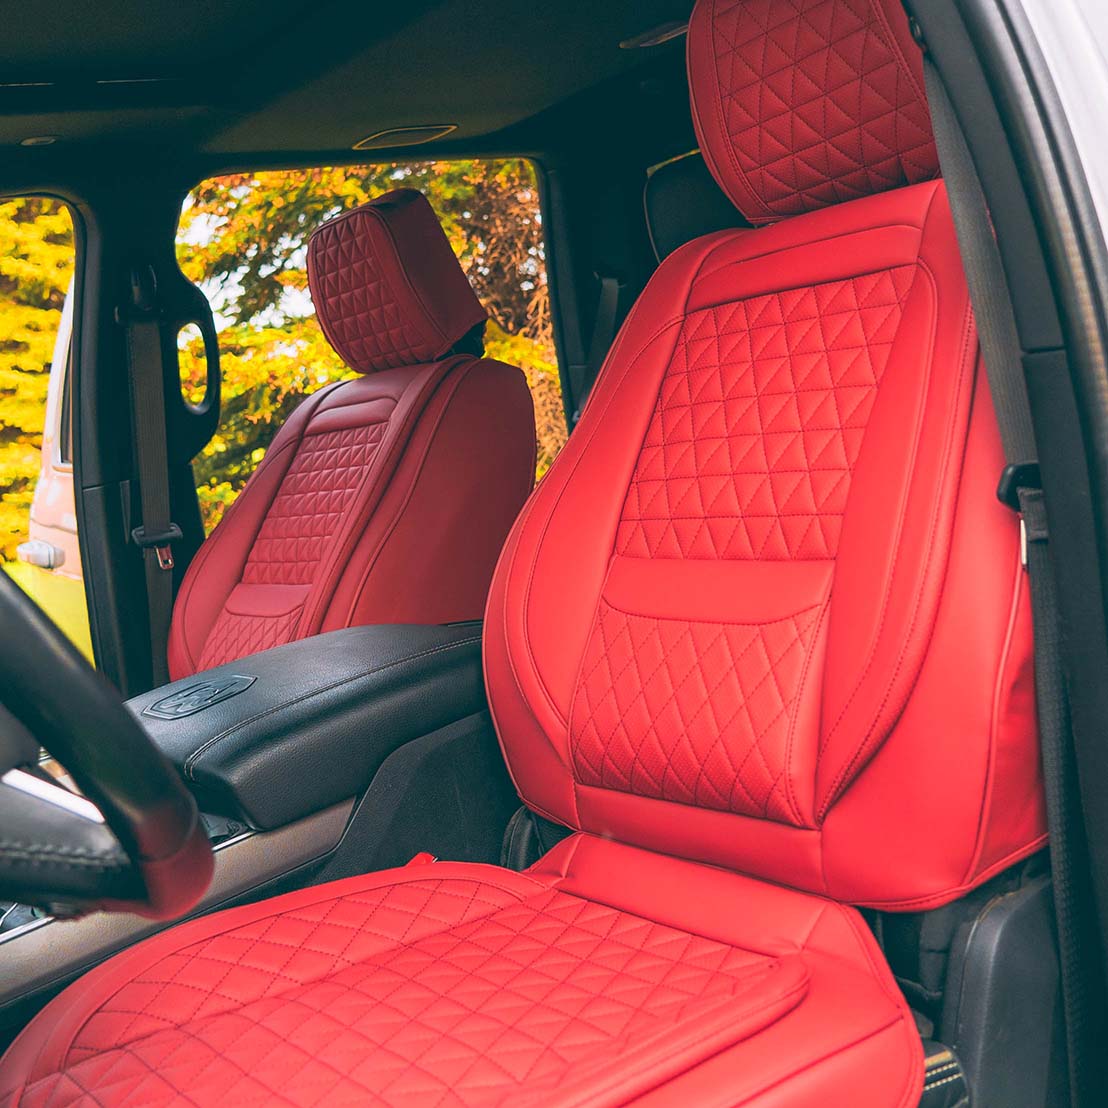 Luxury Seat Covers - Wine Red